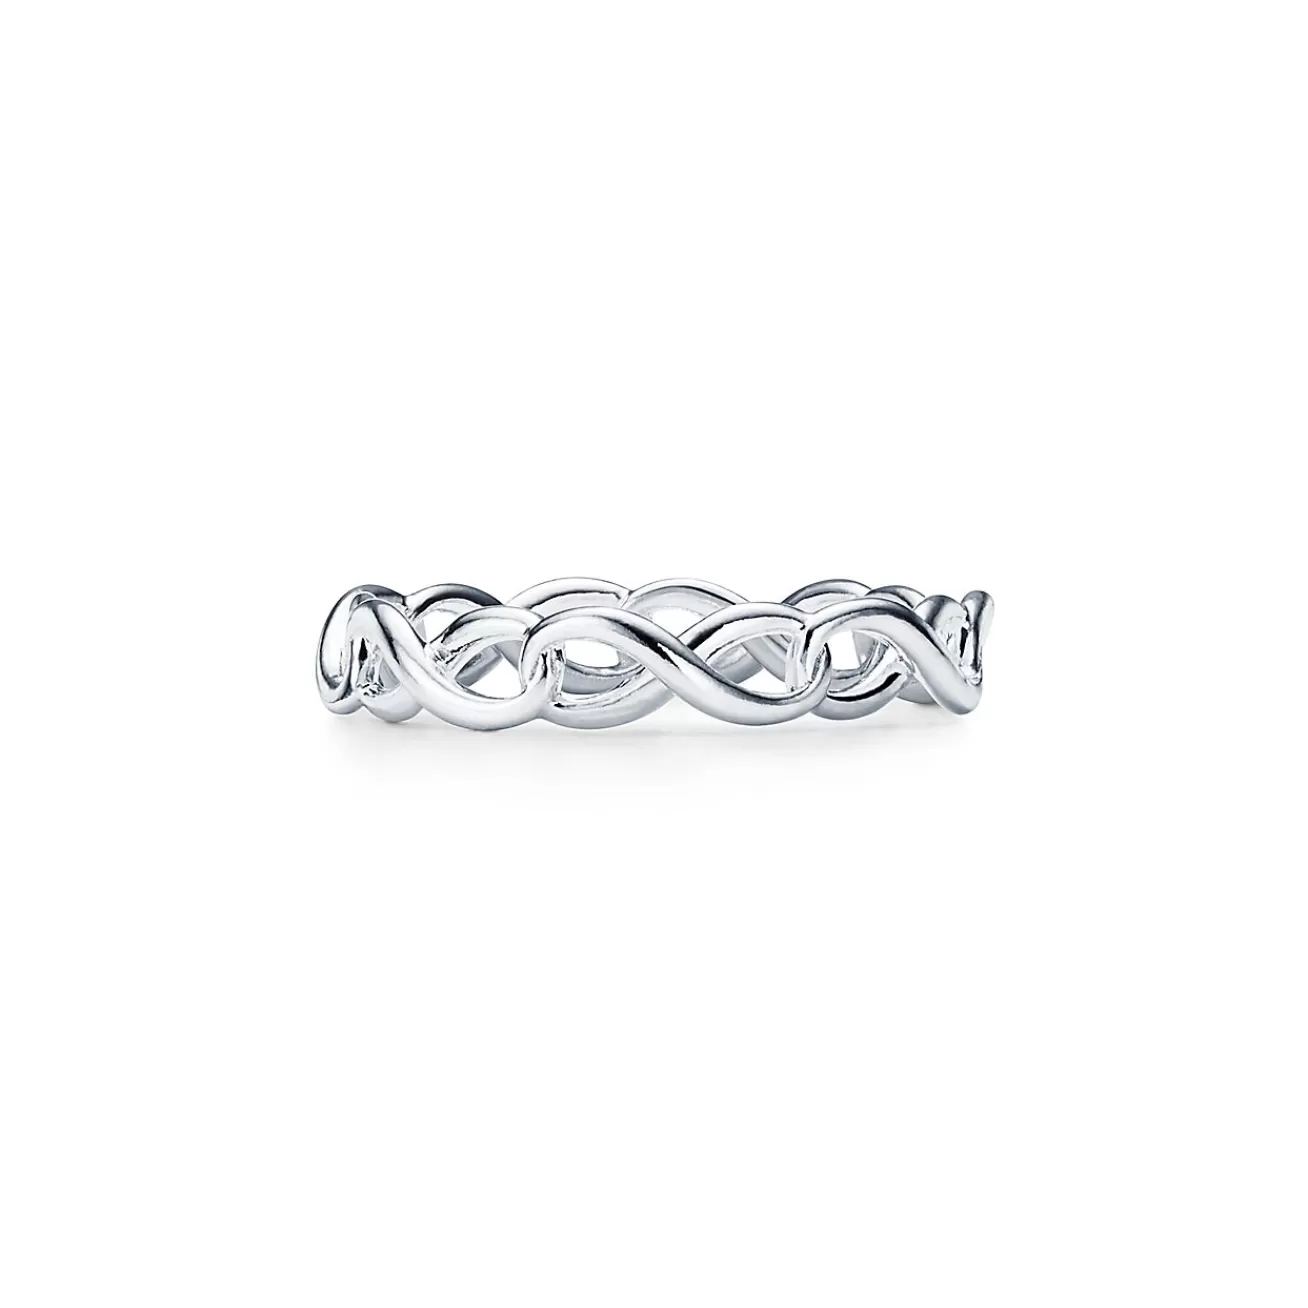 Tiffany & Co. Tiffany Infinity narrow band ring in sterling silver | ^ Rings | Sterling Silver Jewelry